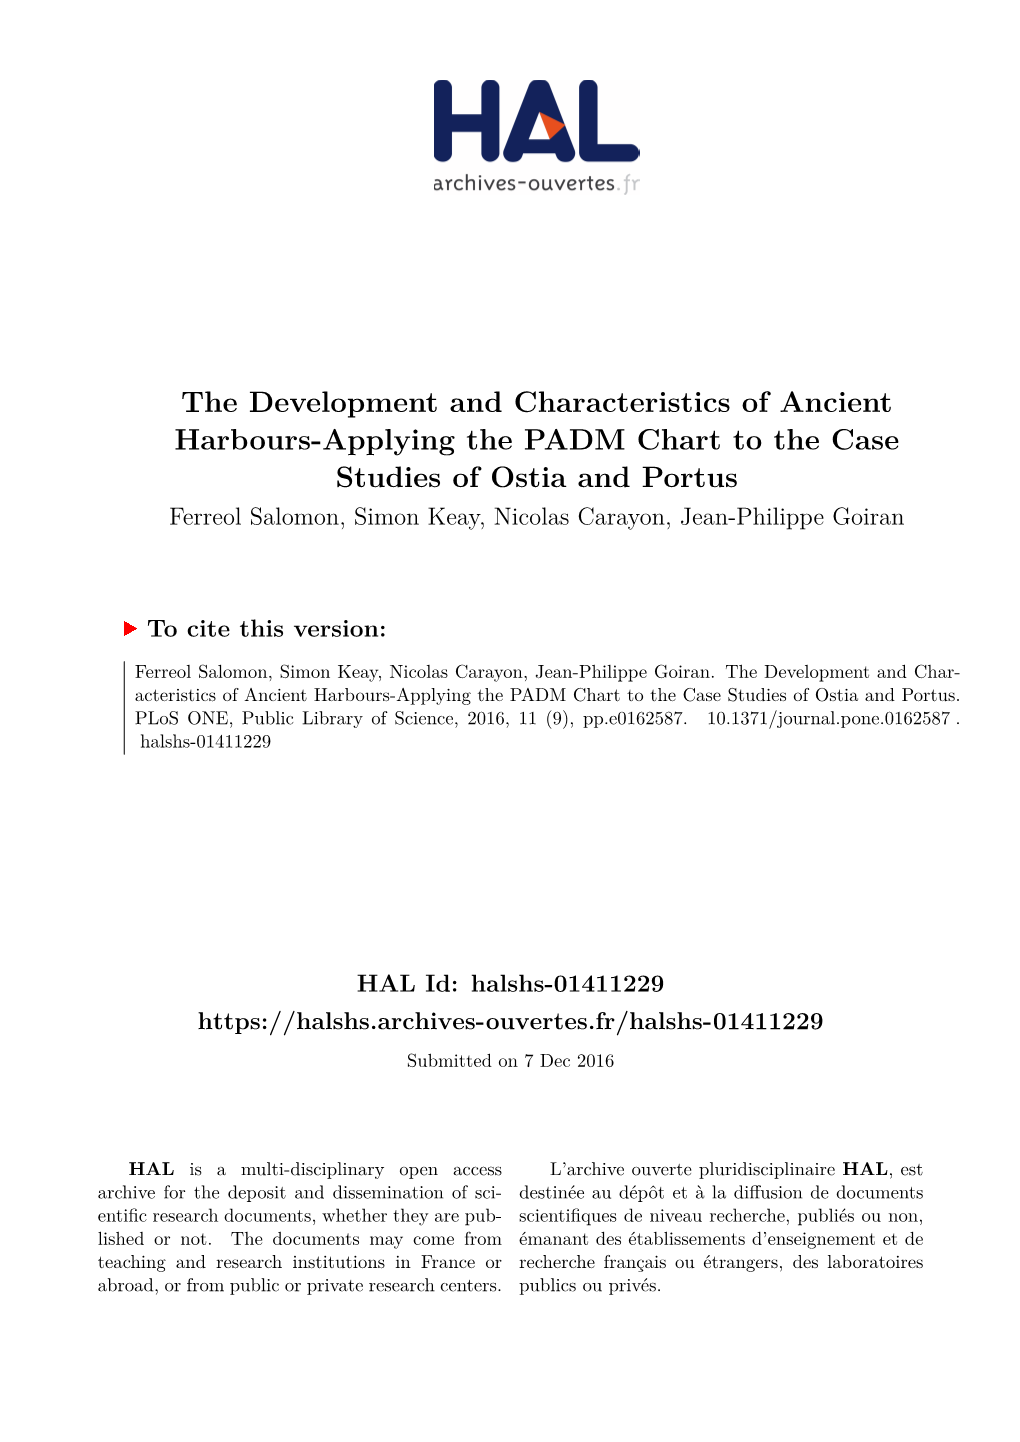 The Development and Characteristics of Ancient Harbours-Applying The